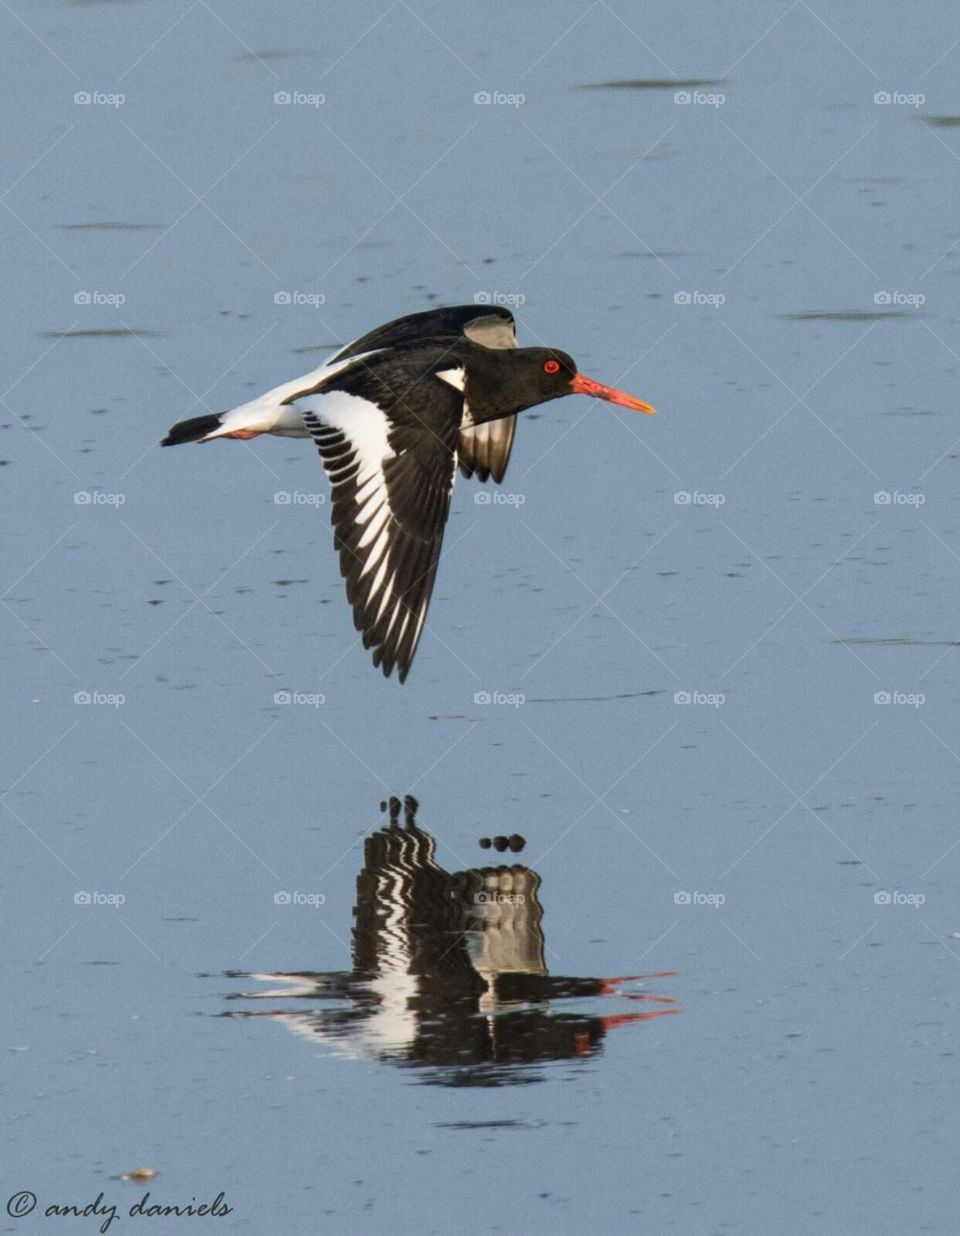 Oystercatcher and reflection